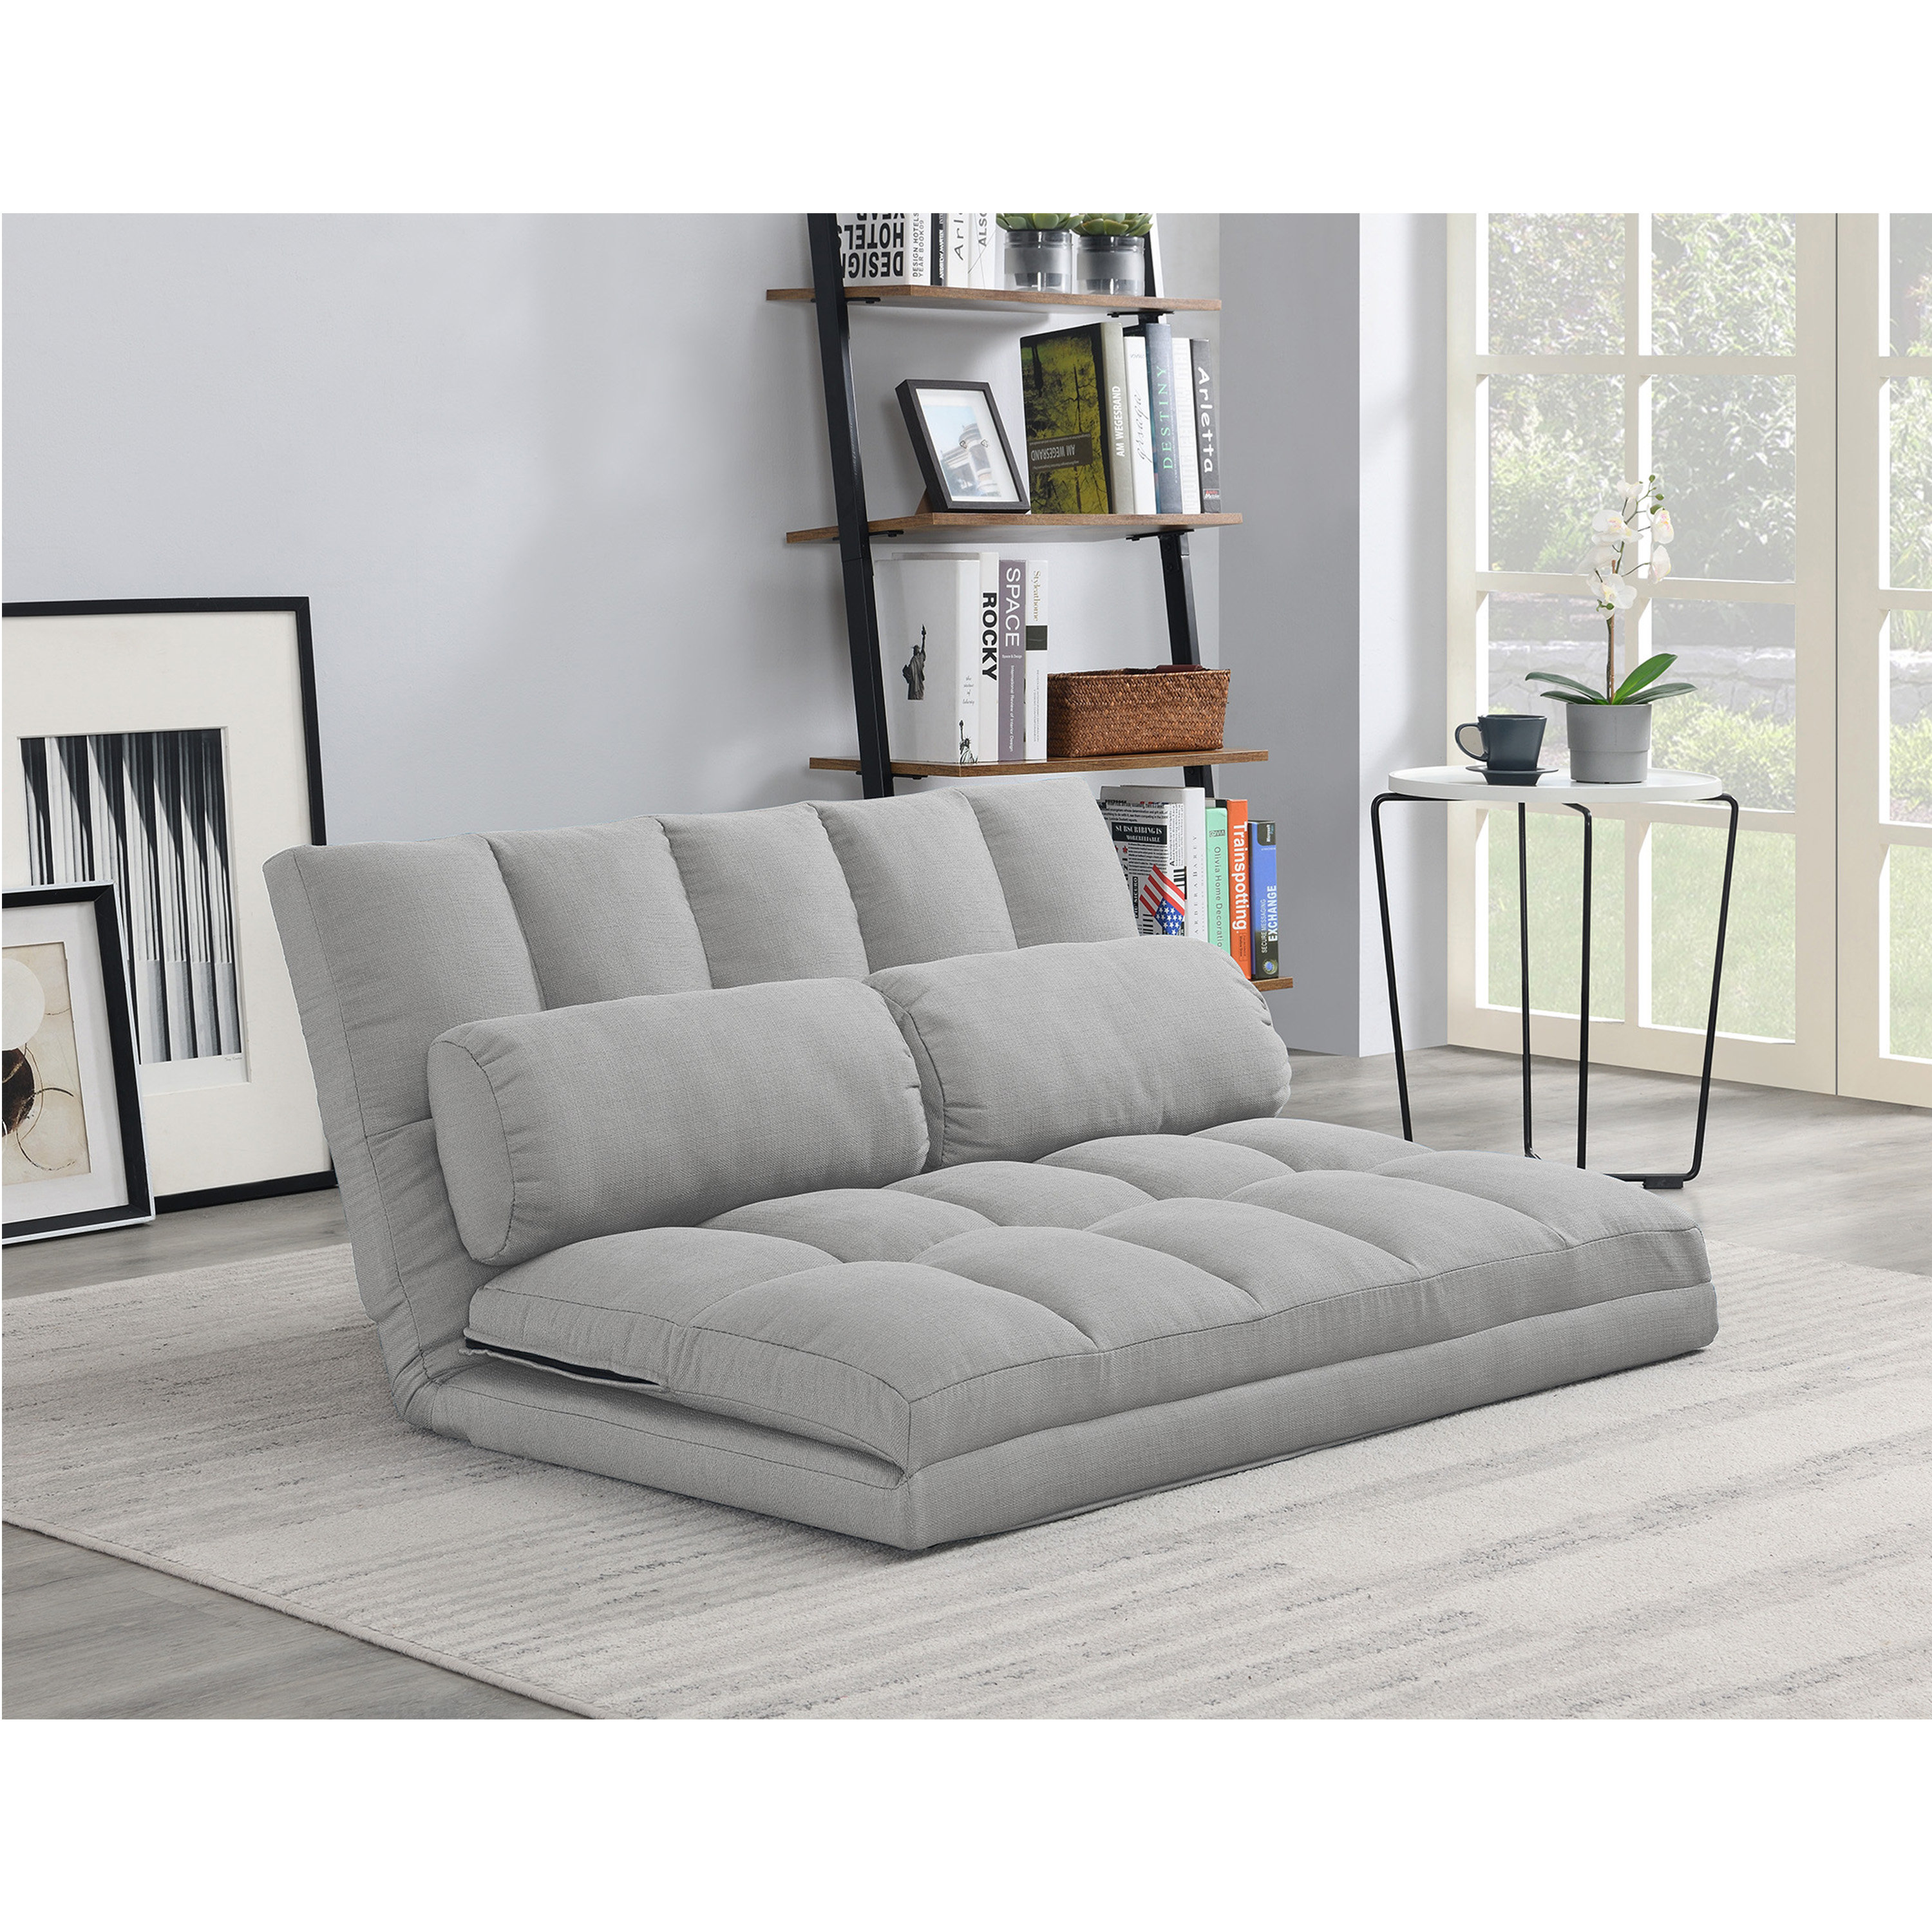 Sectional Sofa Bed Vs. Futon: Which One is the Perfect Addition to Your Living Space?  